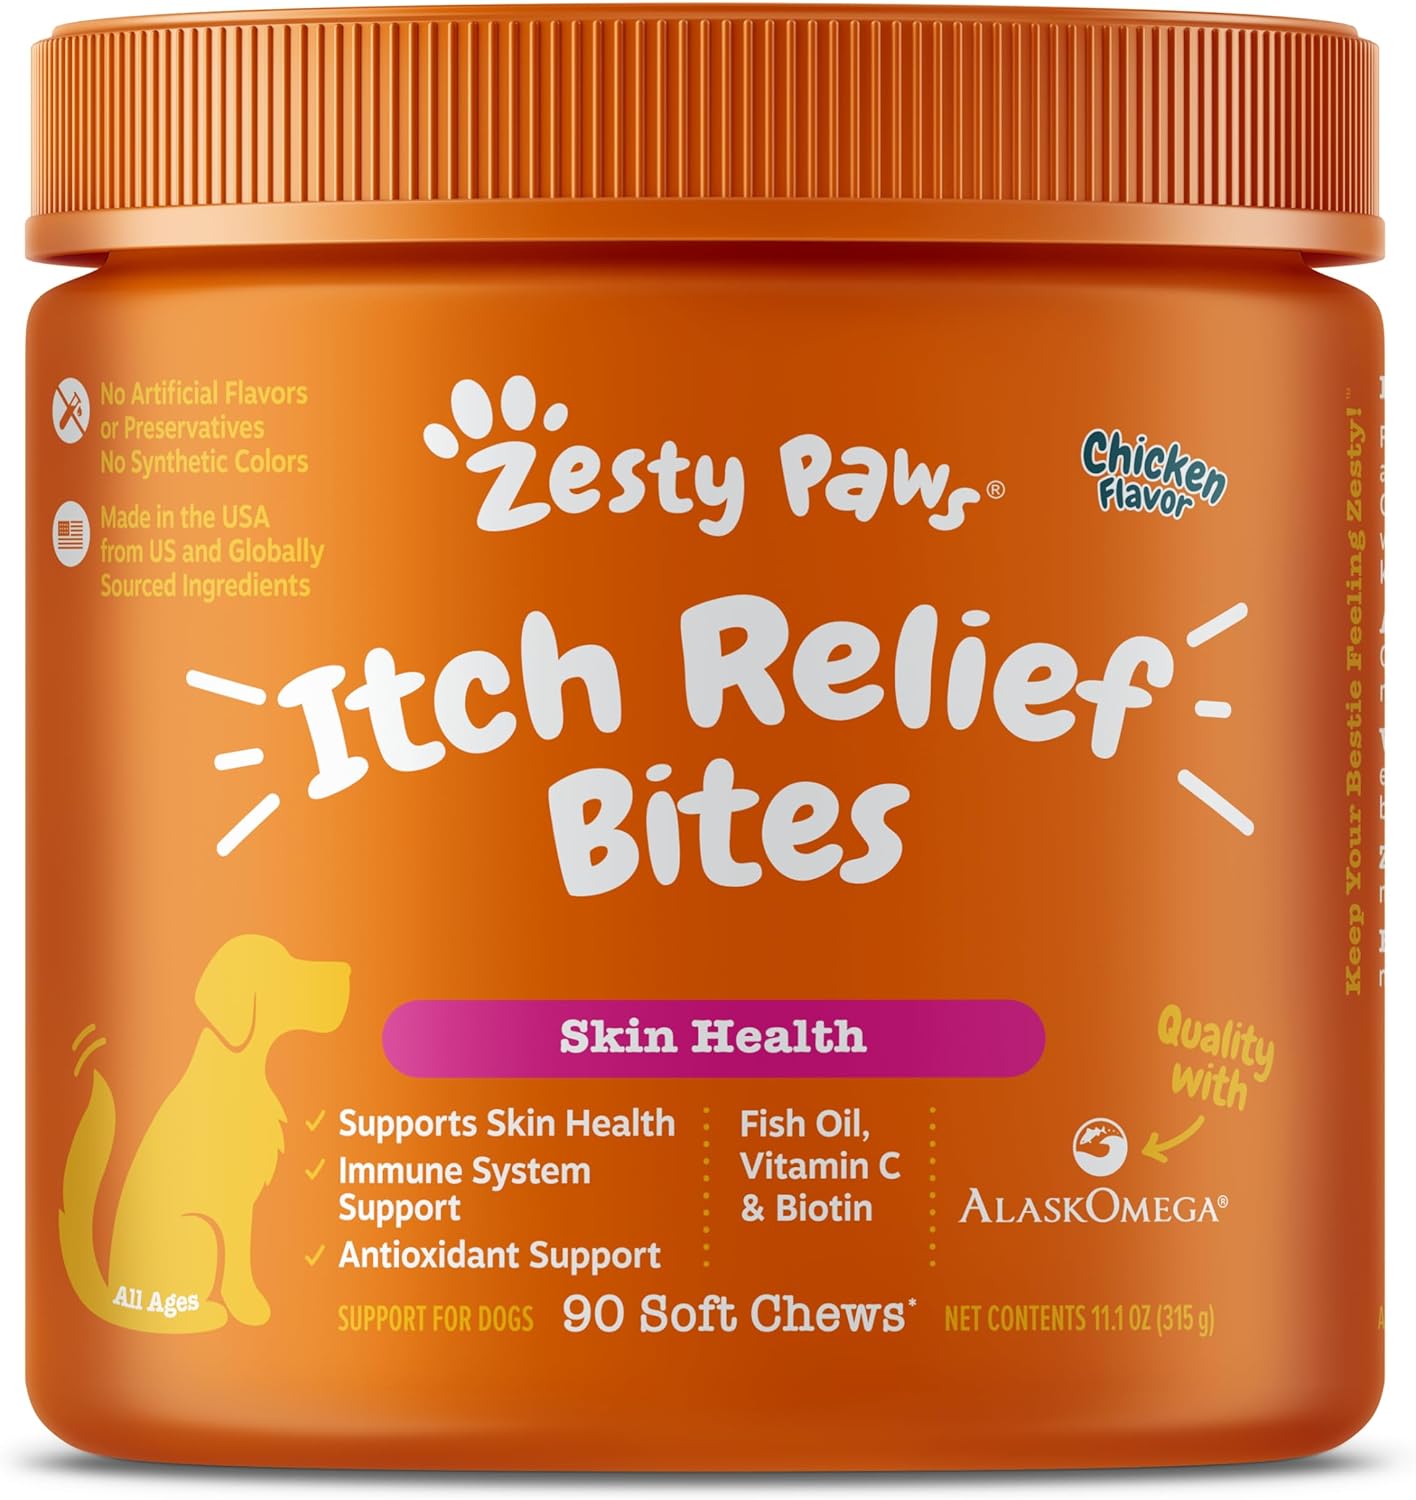 Itch Relief Bites for Dogs